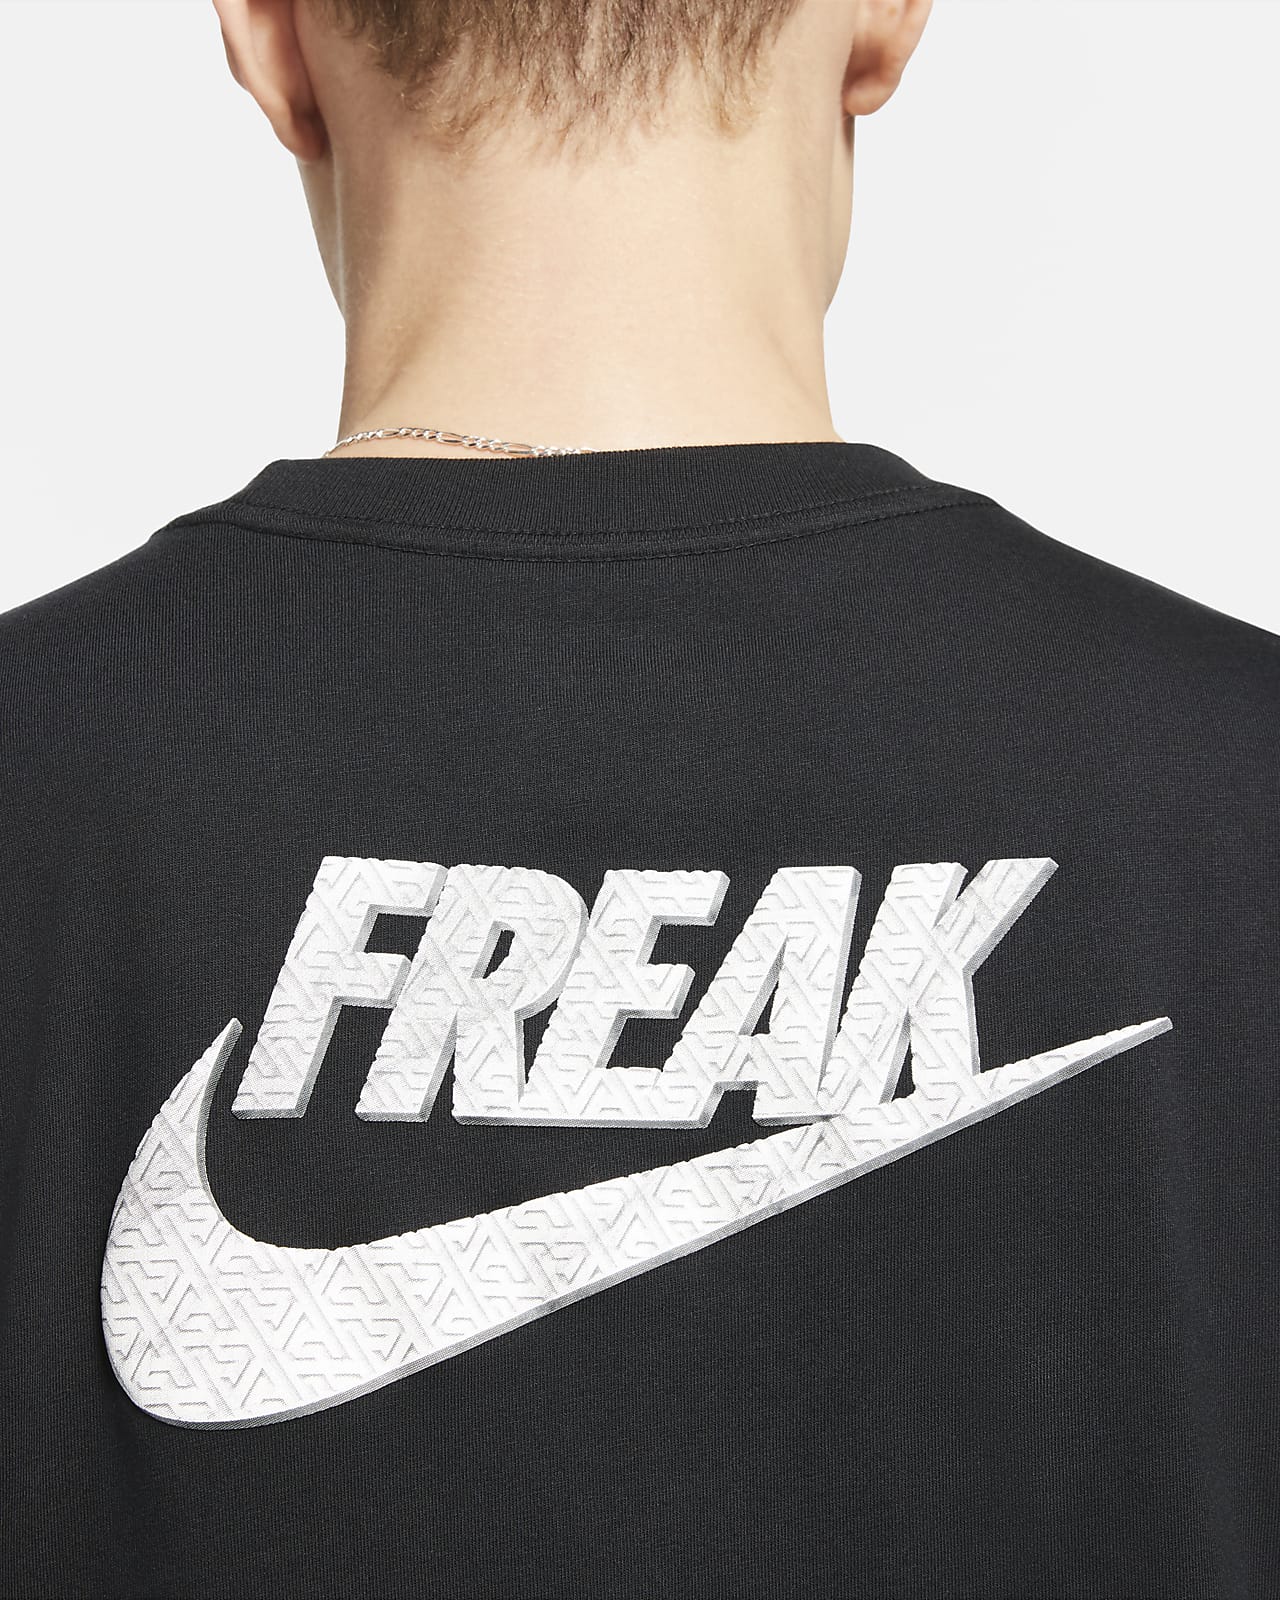 Nike T Shirt Freak Clearance Sale, UP TO 52% OFF | www 